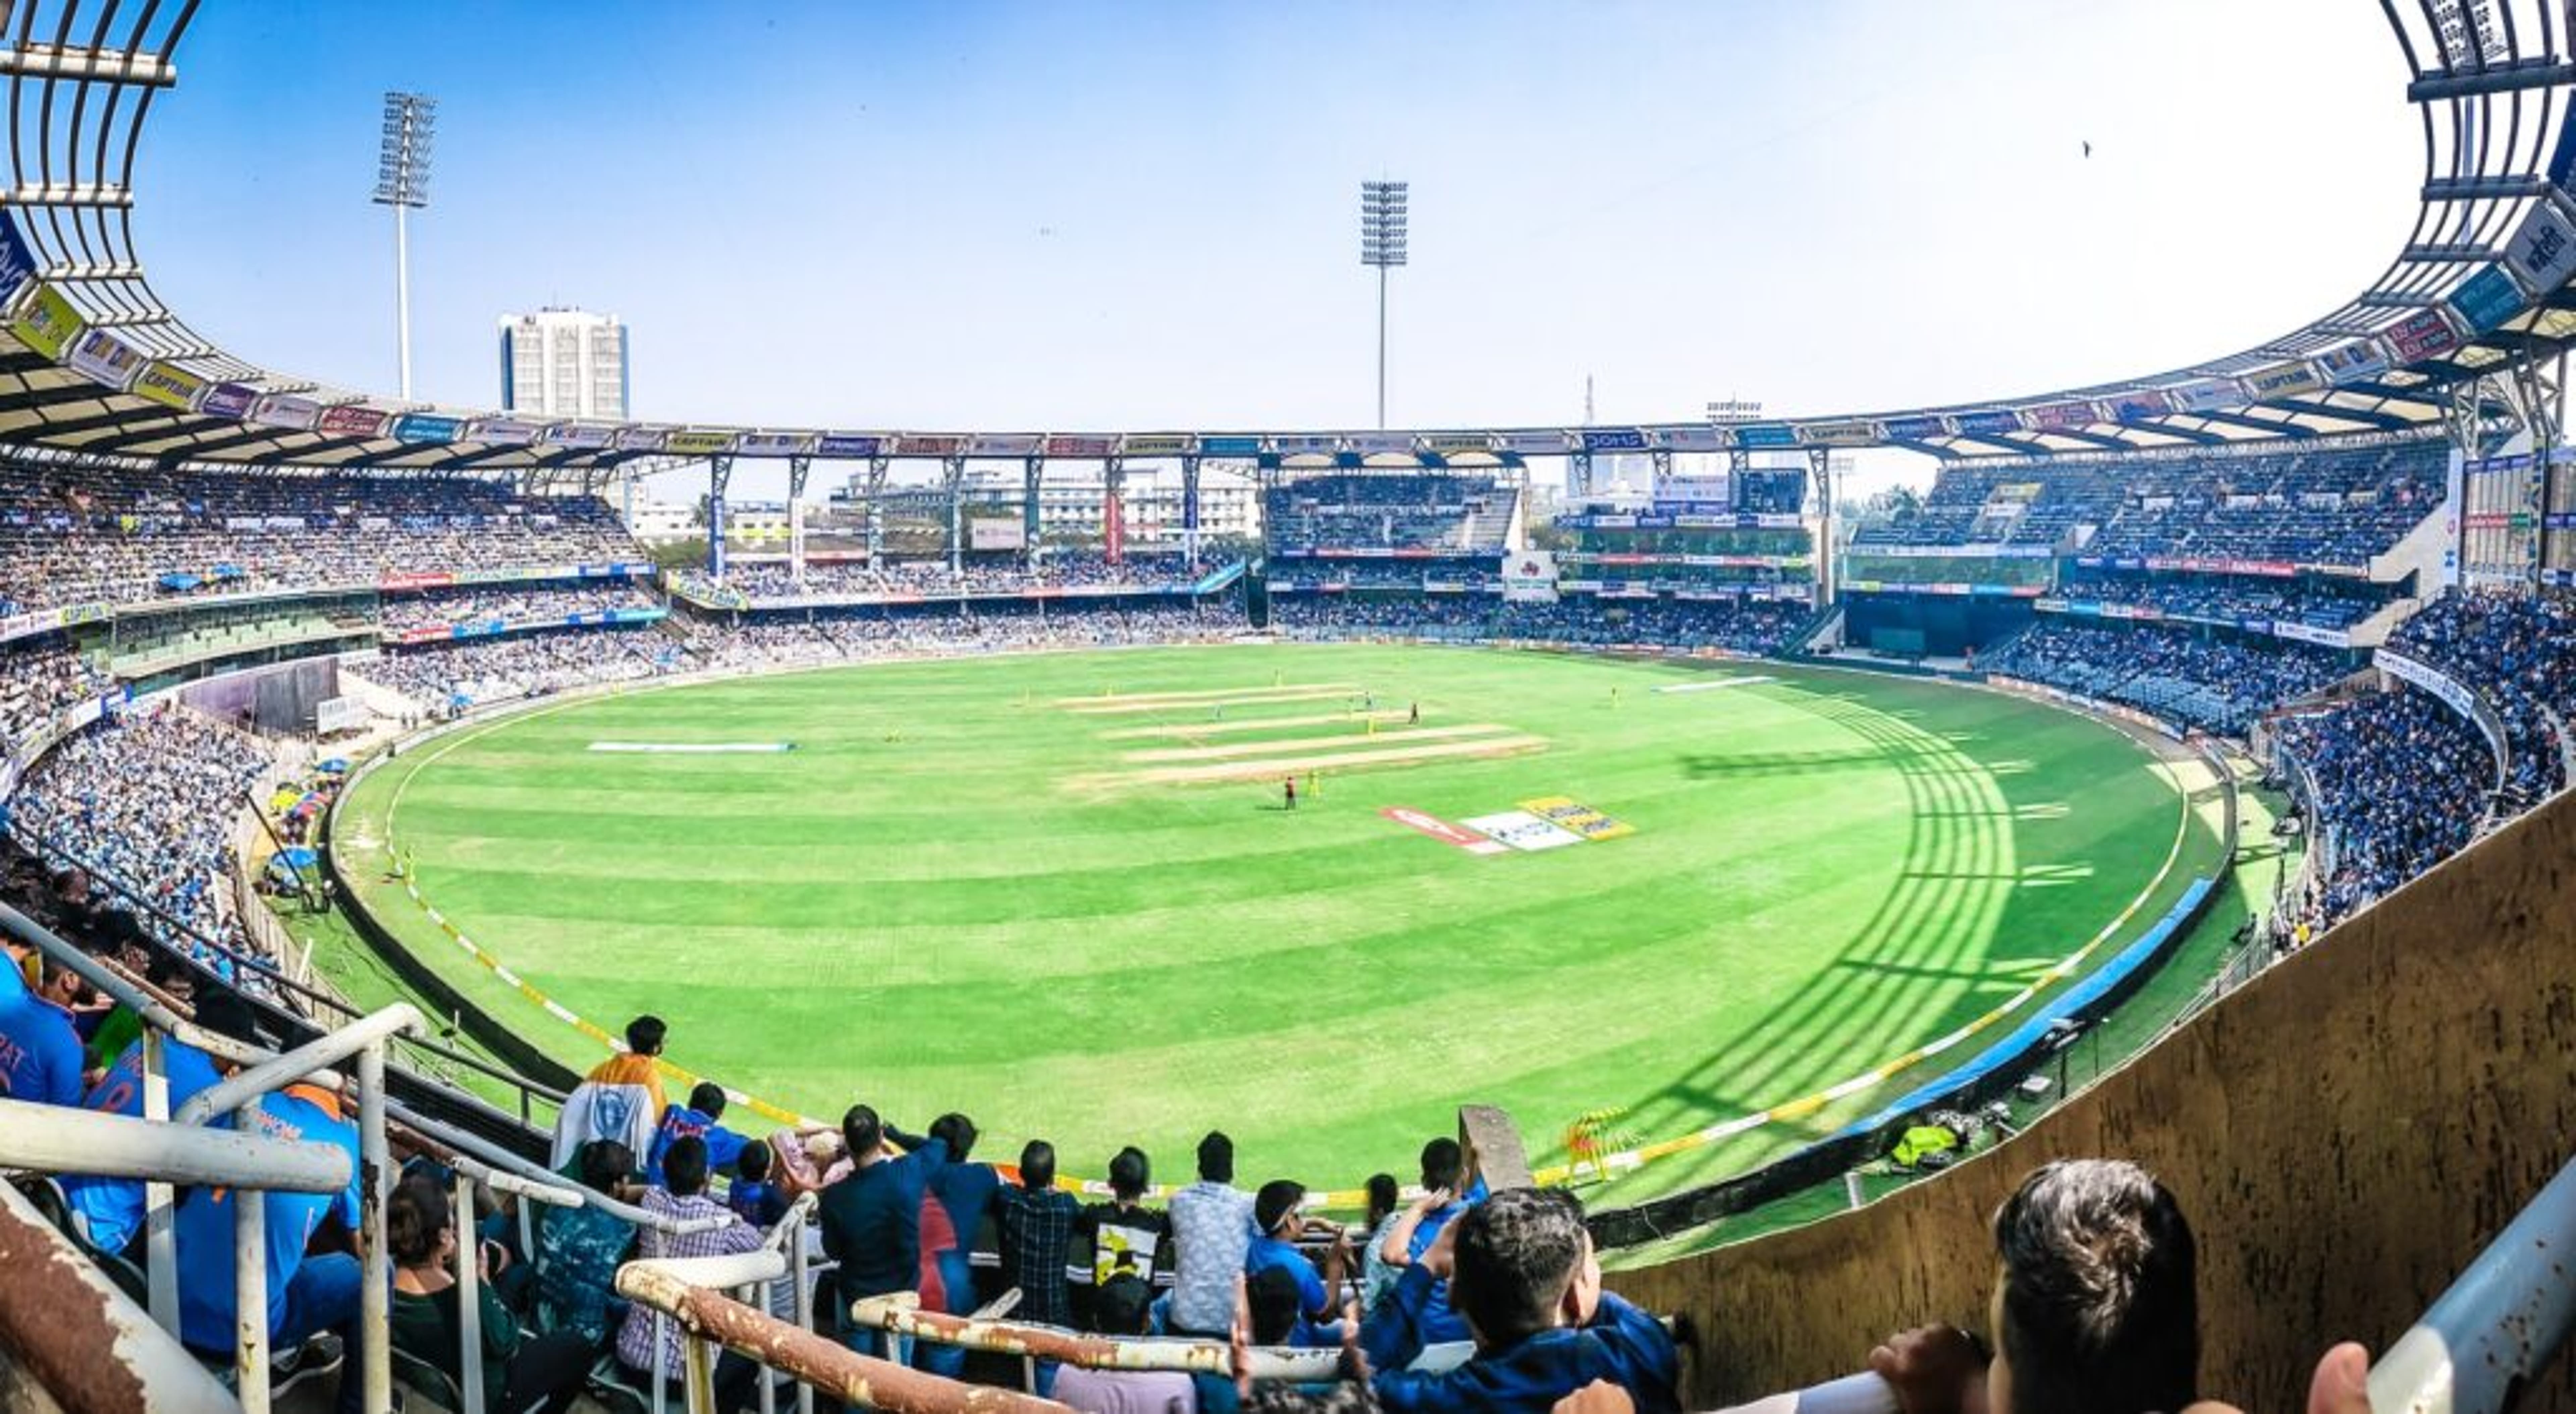 Disney Star Hits A Six With ₹200 Crore HUL Deal For Cricket World Cup, Asia Cup: Report